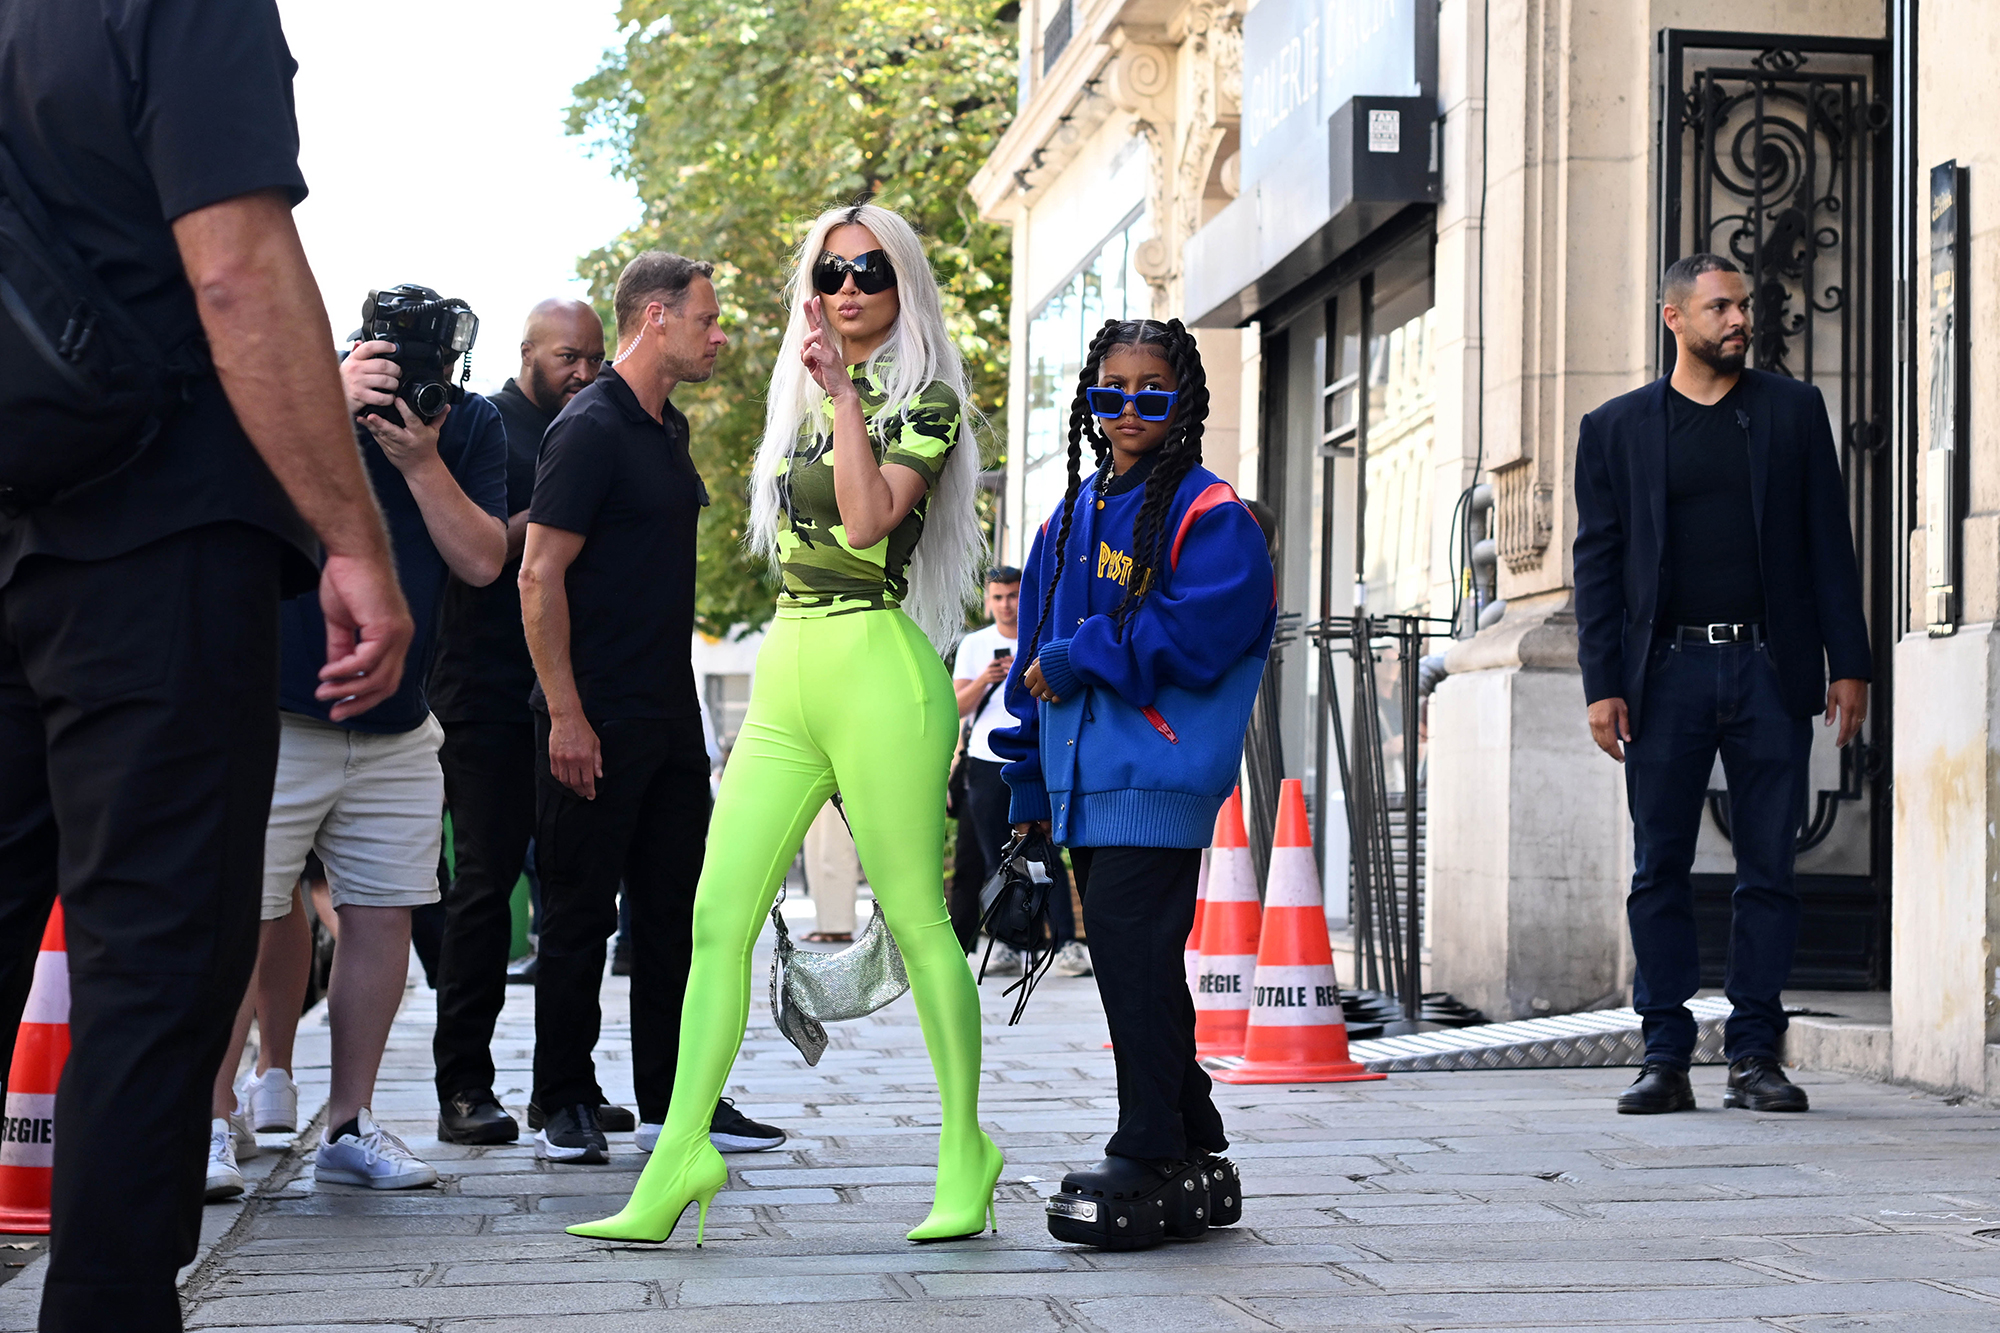 Kim Kardashian and North West are a stylish mother-daughter duo on the streets of Paris